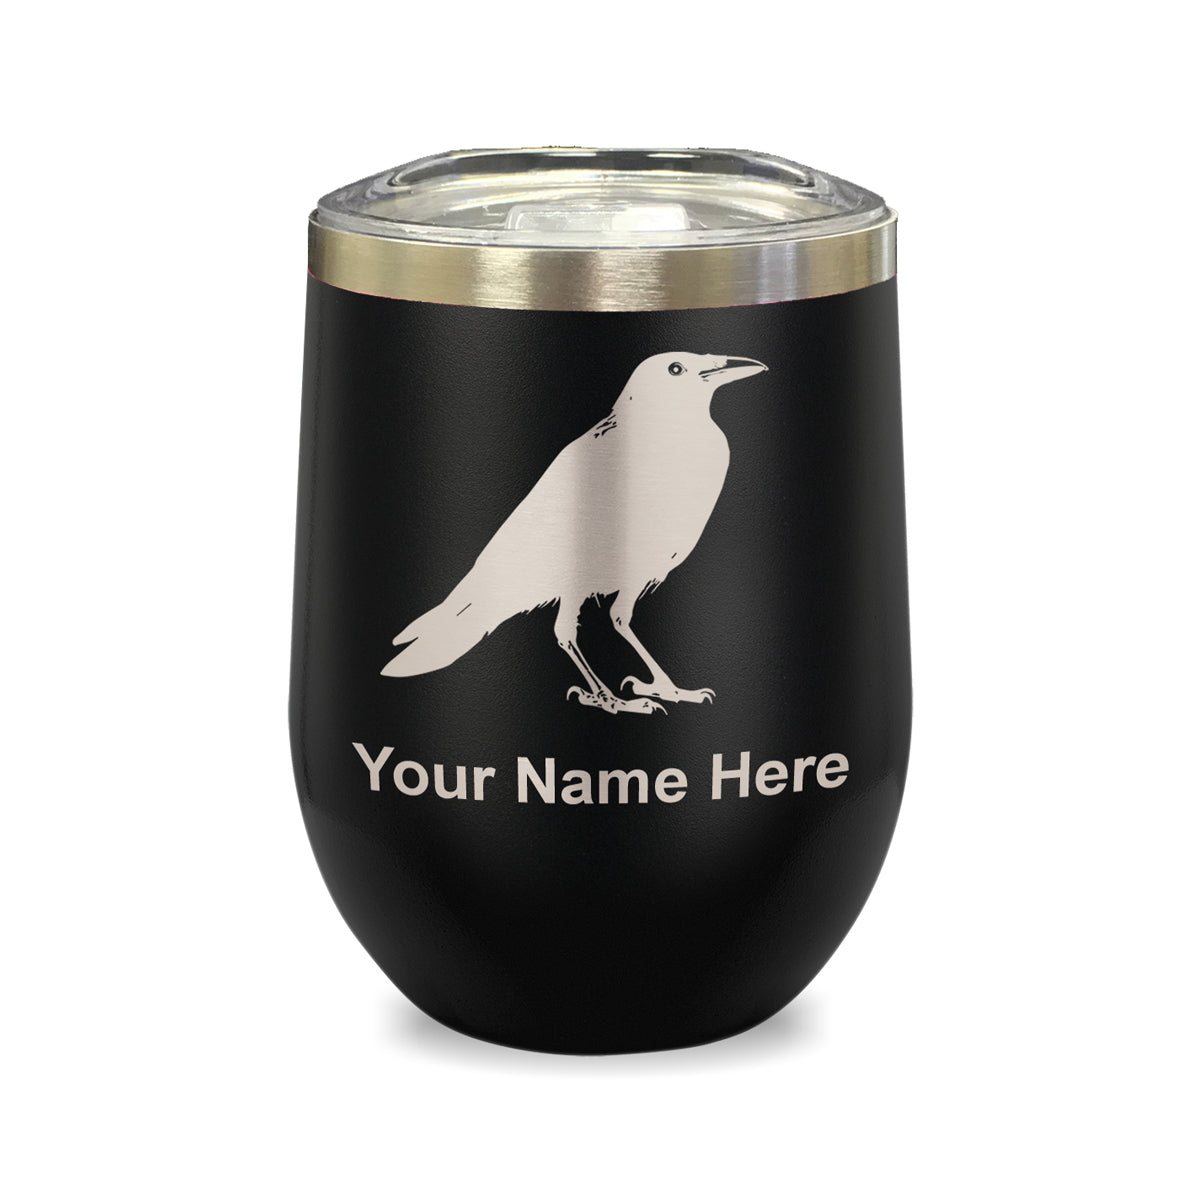 LaserGram Double Wall Stainless Steel Wine Glass, Crow, Personalized Engraving Included